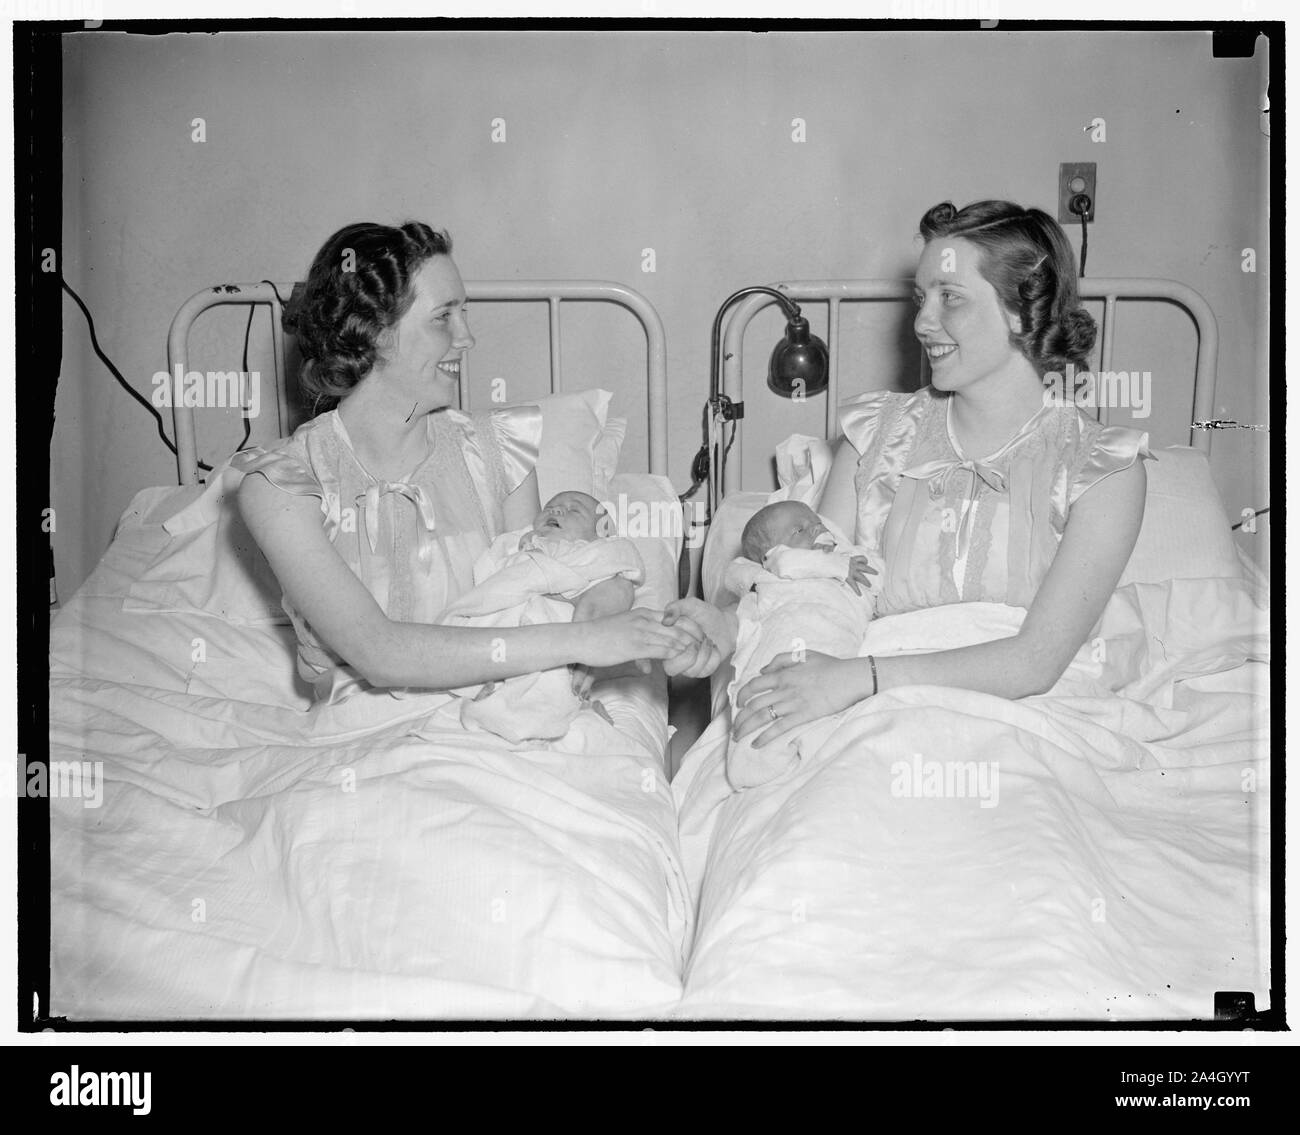 Twins become mothers together for second time in less than two years. Washington, D.C., April 7. Accustomed to doing practically the same things all their lives, these Washington twins, now mothers, have apparently decided that having their children together would certainly be in order. The mothers, Mrs. Eileen Moon, left, and Mrs. Kathleen Robie, last week gave birth to daughters to set a new record at Columbia Maternity Hospital. Mrs. Moon's youngster, whom she named Carol, was born on March 29, while Mrs. Robie's new daughter Nancy Lee first saw the light of day on April 1. This same thing Stock Photo